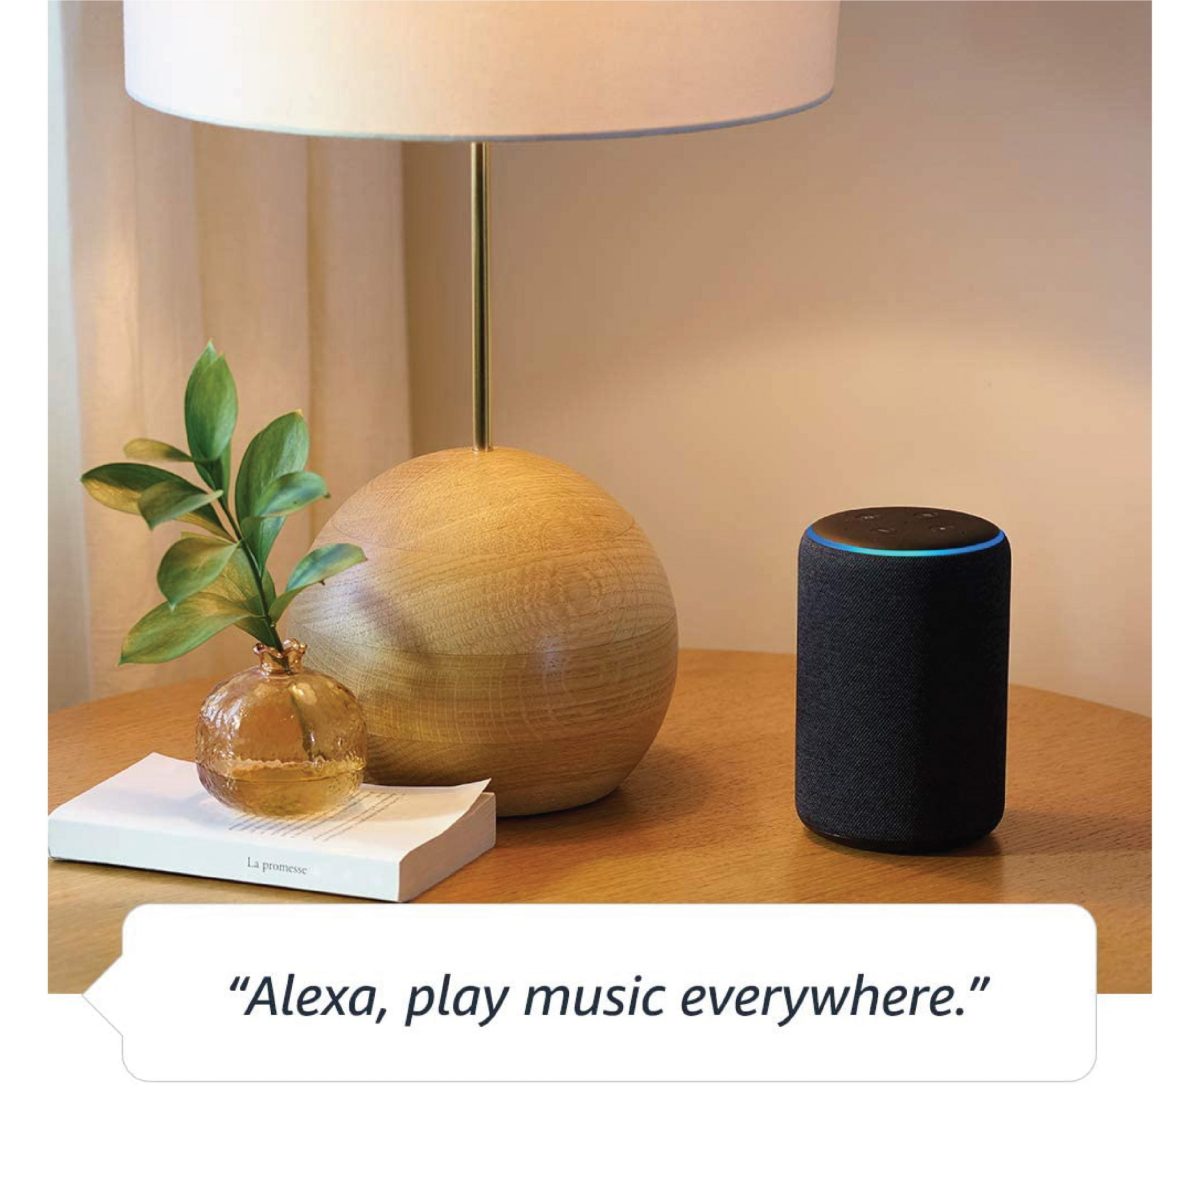 Adasd2X 03 Scaled Amazon Echo Plus Connects To Alexa And Can Simply Set Up And Voice-Control Compatible Smart Home Devices. Play Music Powered By Dolby From Your Favourite Streaming Services. Just Ask Alexa To Play Music, Read The News, Check Weather Forecasts, Set Alarms And Timers, Control Smart Home Devices, Call Echo Devices, And More. Alexa Is Always Getting Smarter And Adding New Features And Skills. &Lt;Ul&Gt; &Lt;Li&Gt;1 Internal Speaker.&Lt;/Li&Gt; &Lt;Li&Gt;3.5Mm Aux In.&Lt;/Li&Gt; &Lt;Li&Gt;2 Amplifier Channels.&Lt;/Li&Gt; &Lt;Li&Gt;Frequency 70Hz-20000Hz.&Lt;/Li&Gt; &Lt;Li&Gt;Size H14.85, W9.92, D9.92Cm.&Lt;/Li&Gt; &Lt;/Ul&Gt; [Video Width=&Quot;1024&Quot; Height=&Quot;576&Quot; Mp4=&Quot;Https://Lablaab.com/Wp-Content/Uploads/2020/04/9734Eb70-3880-47D1-9F7F-7958Db9F4054.Mp4&Quot;][/Video] Echo Plus (2Nd Gen) - Premium Sound With Built In Smart Home Hub - Sand Stone